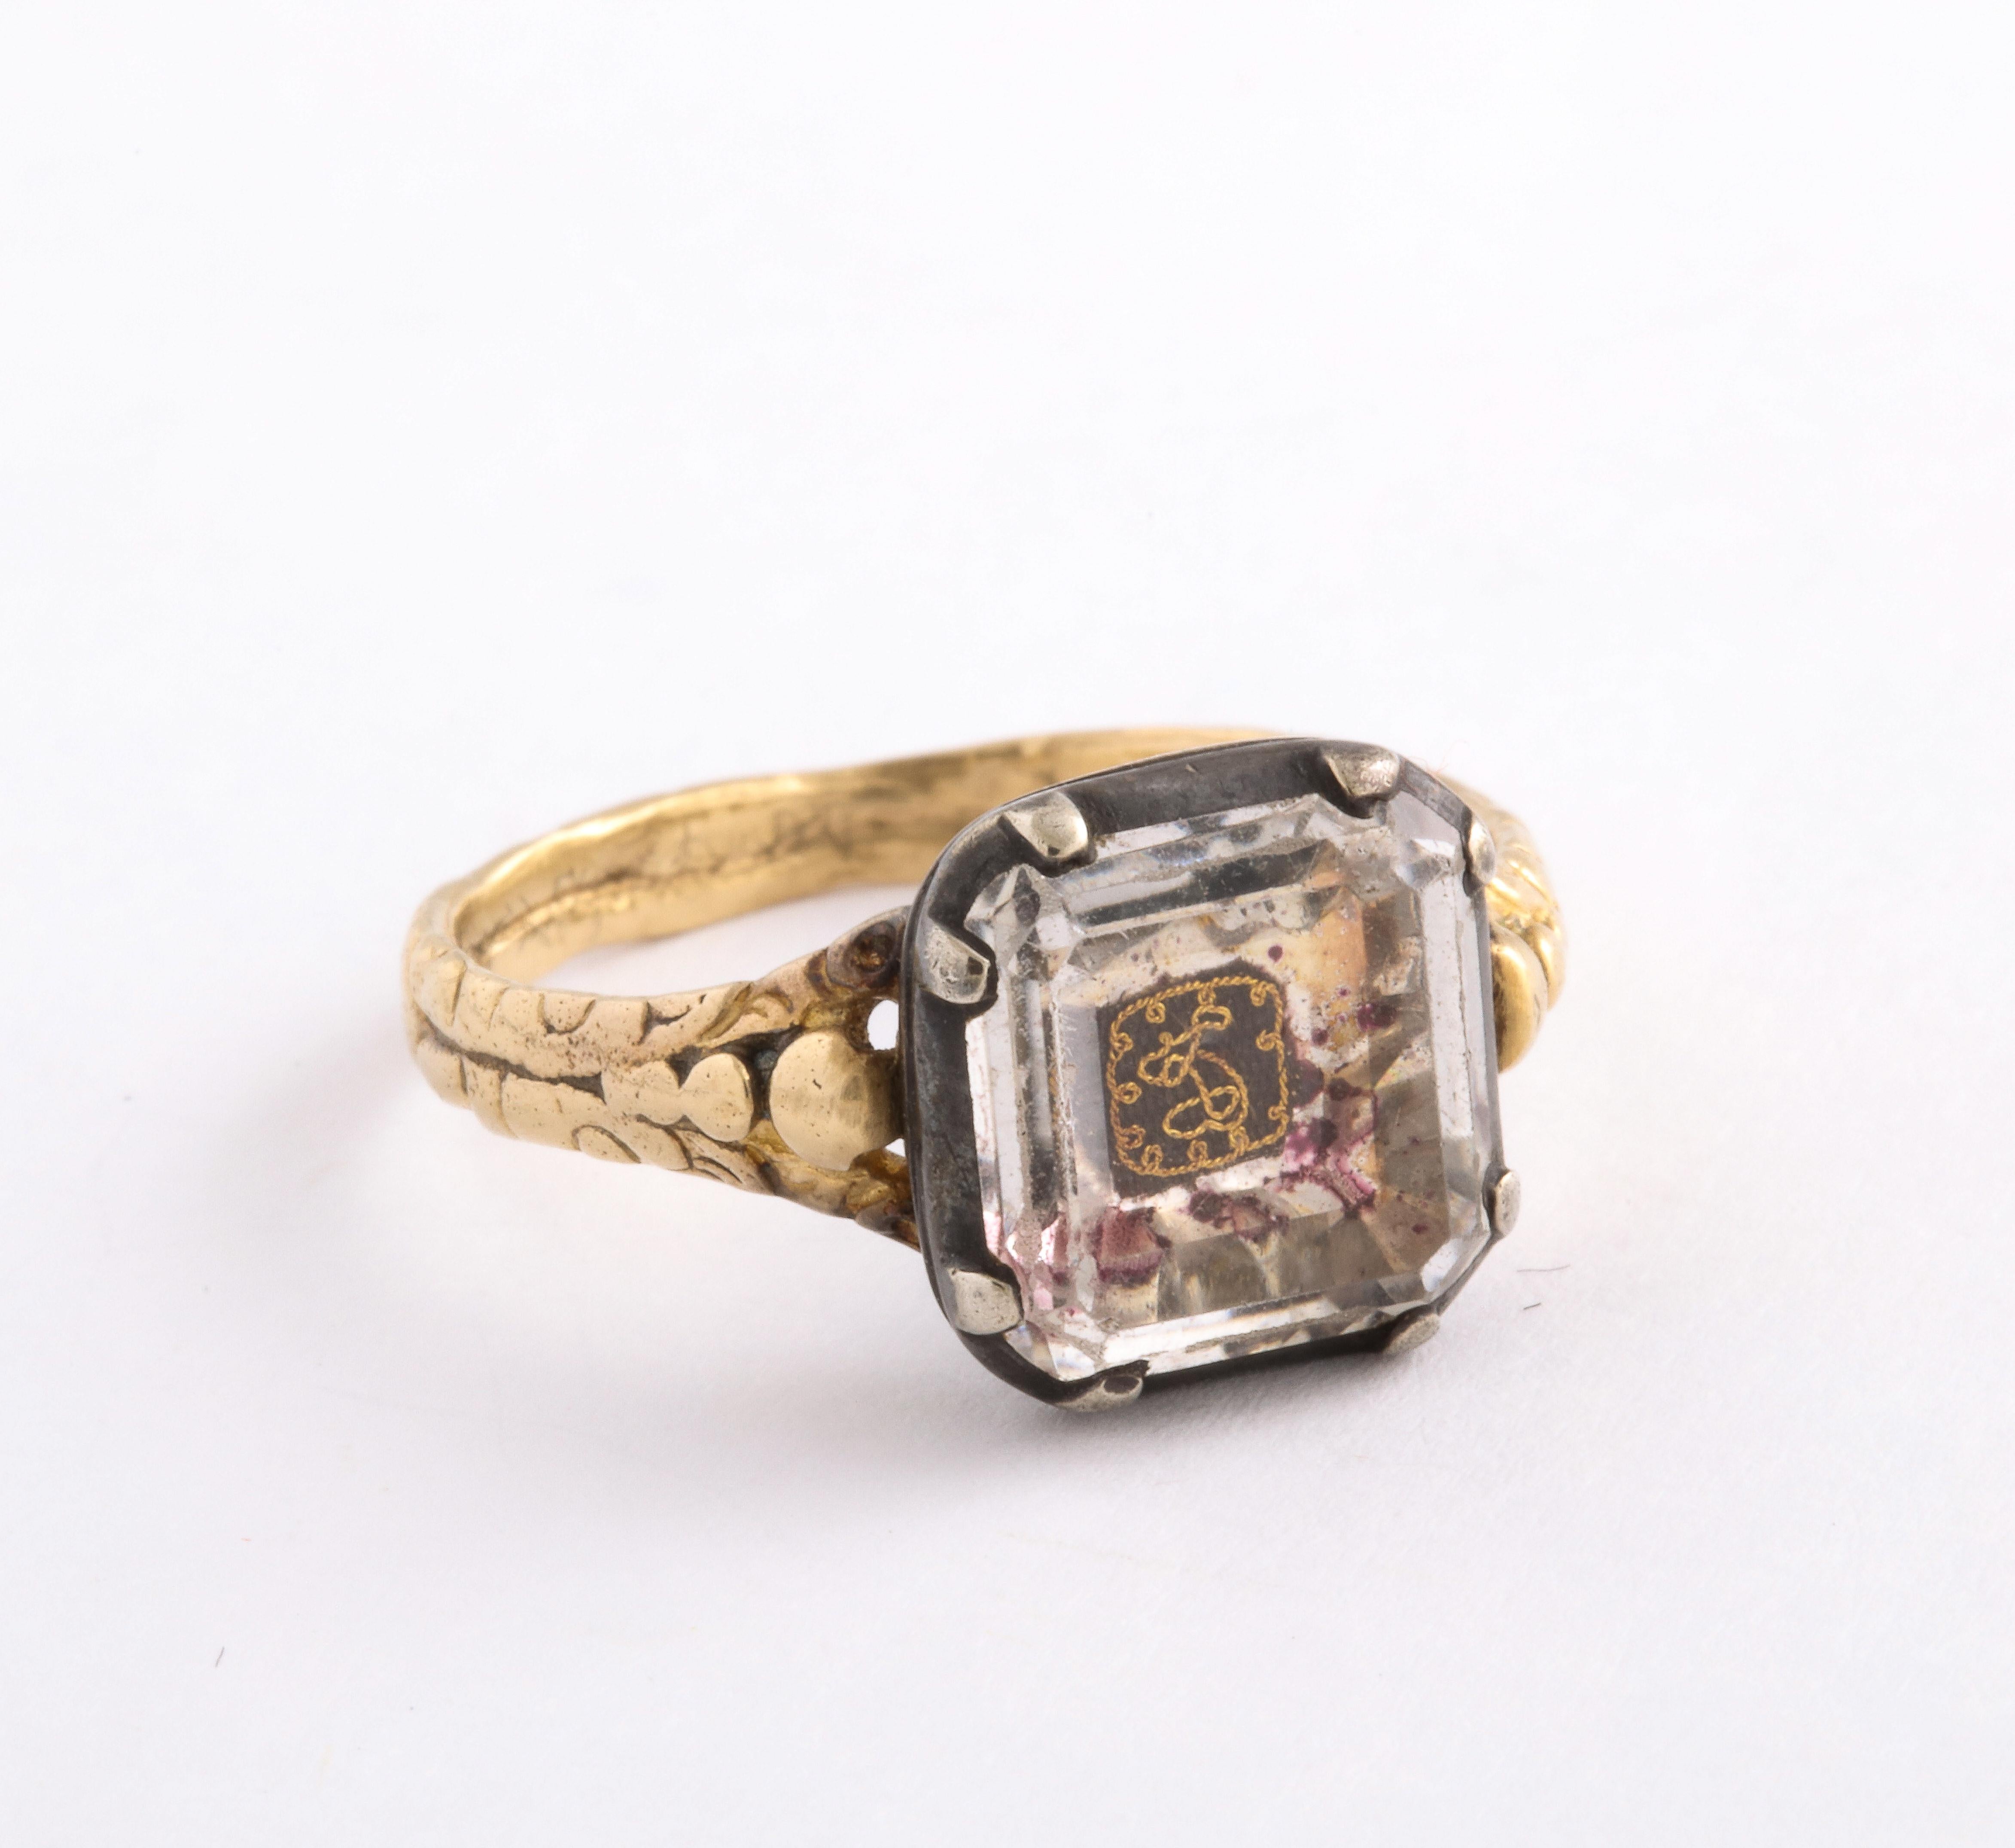 A rare, beautiful and magical Stuart Crystal Ring set in 15 Kt gold and backed in sterling silver. Before I say more please understand that none of the impurities shown in the photographs are visible to the  eye. Photography sees deeply behind the